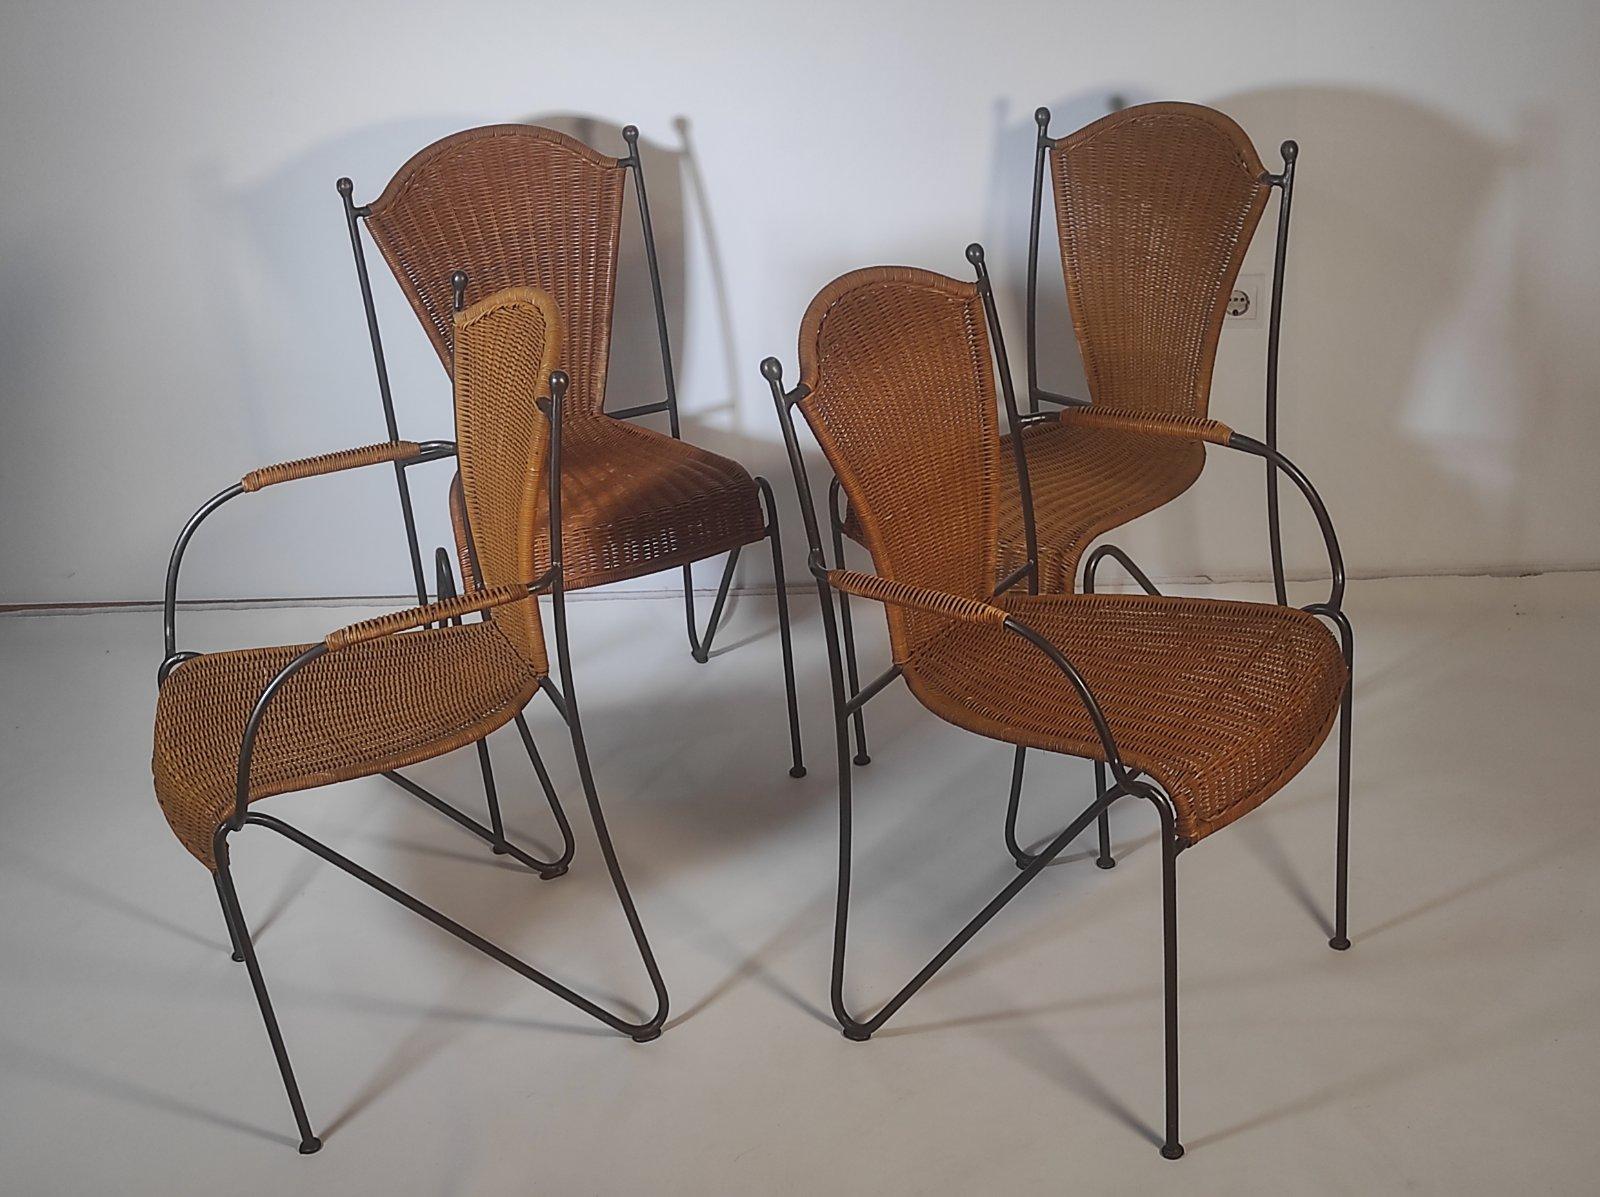 Frederic Weinberg Chairs 1950s